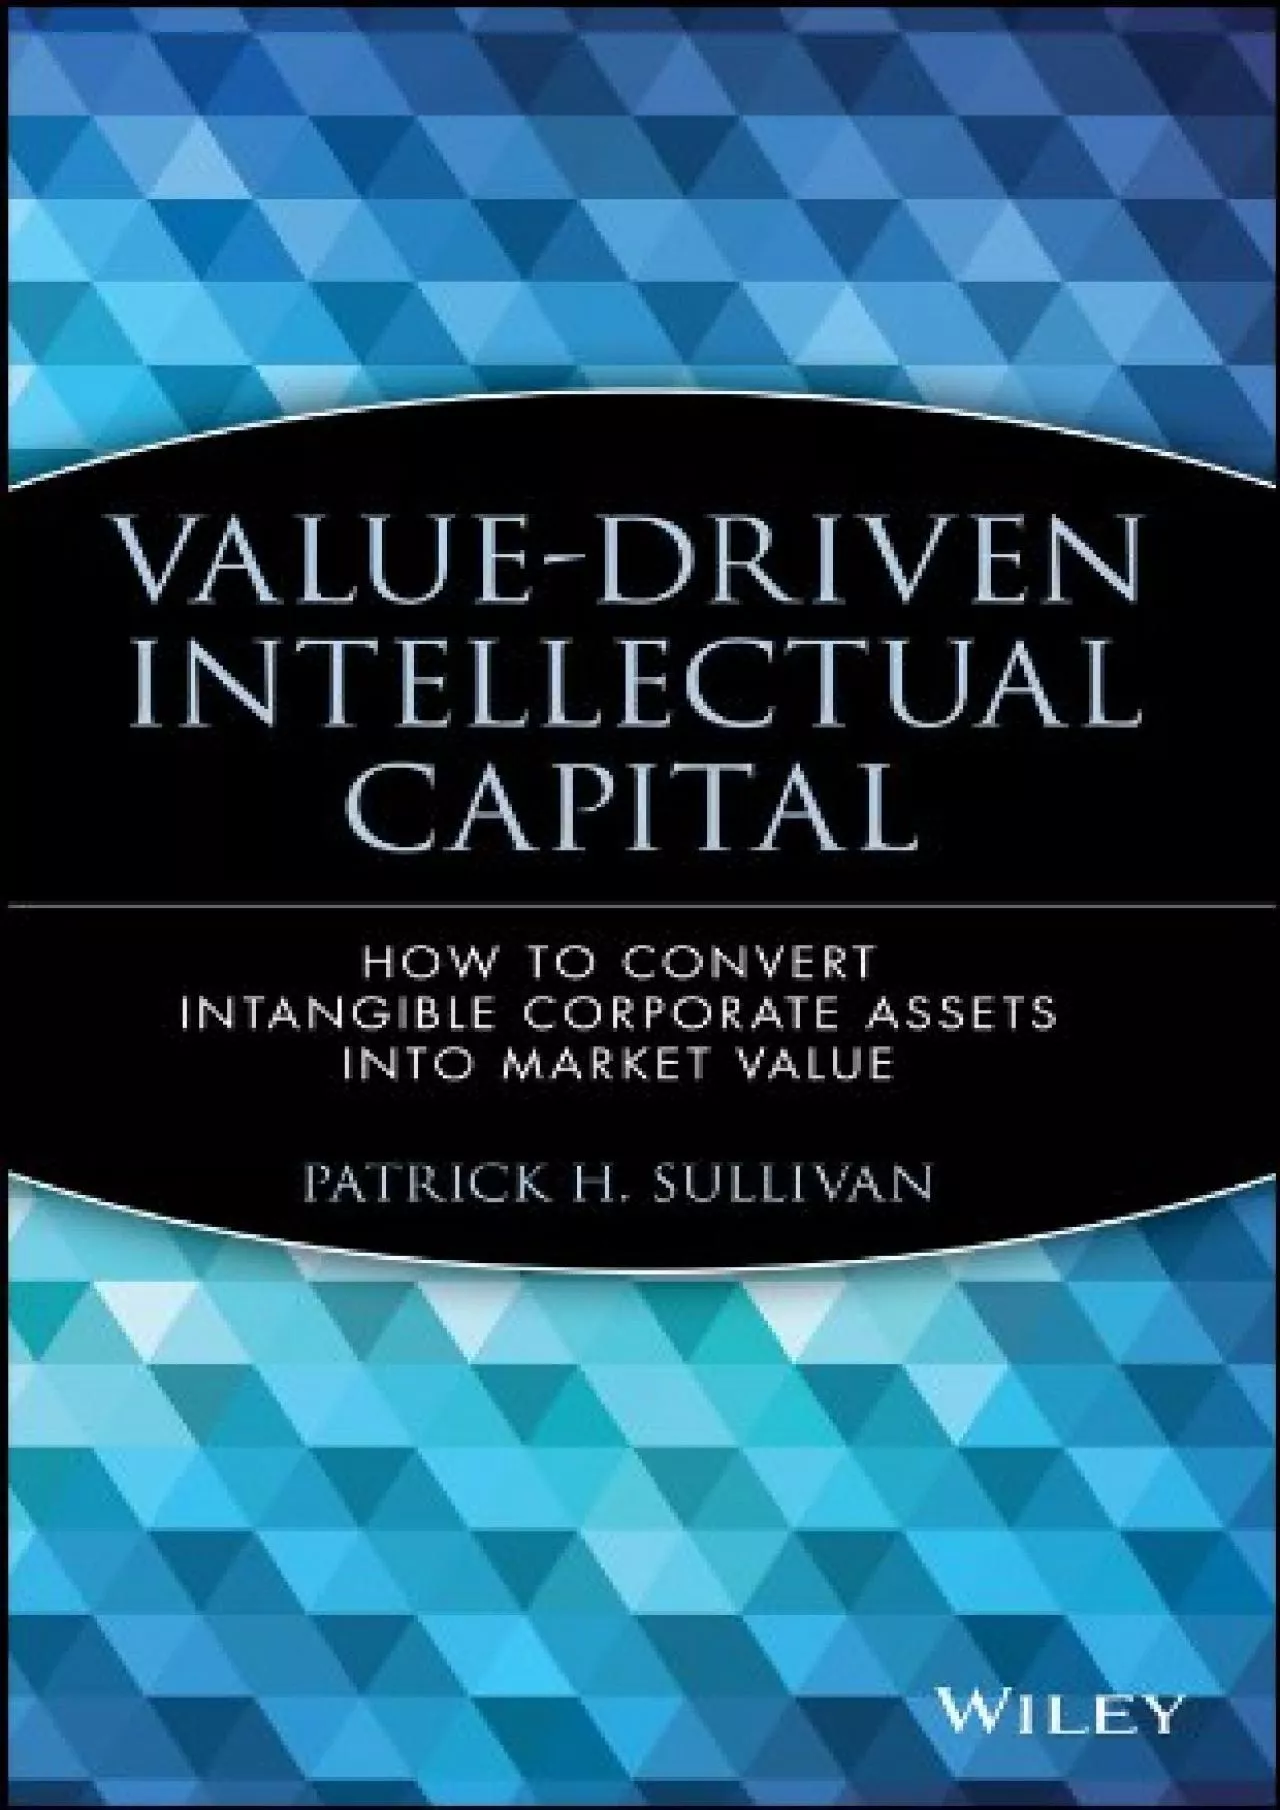 Value-Driven Intellectual Capital: How to Convert Intangible Corporate Assets into Market